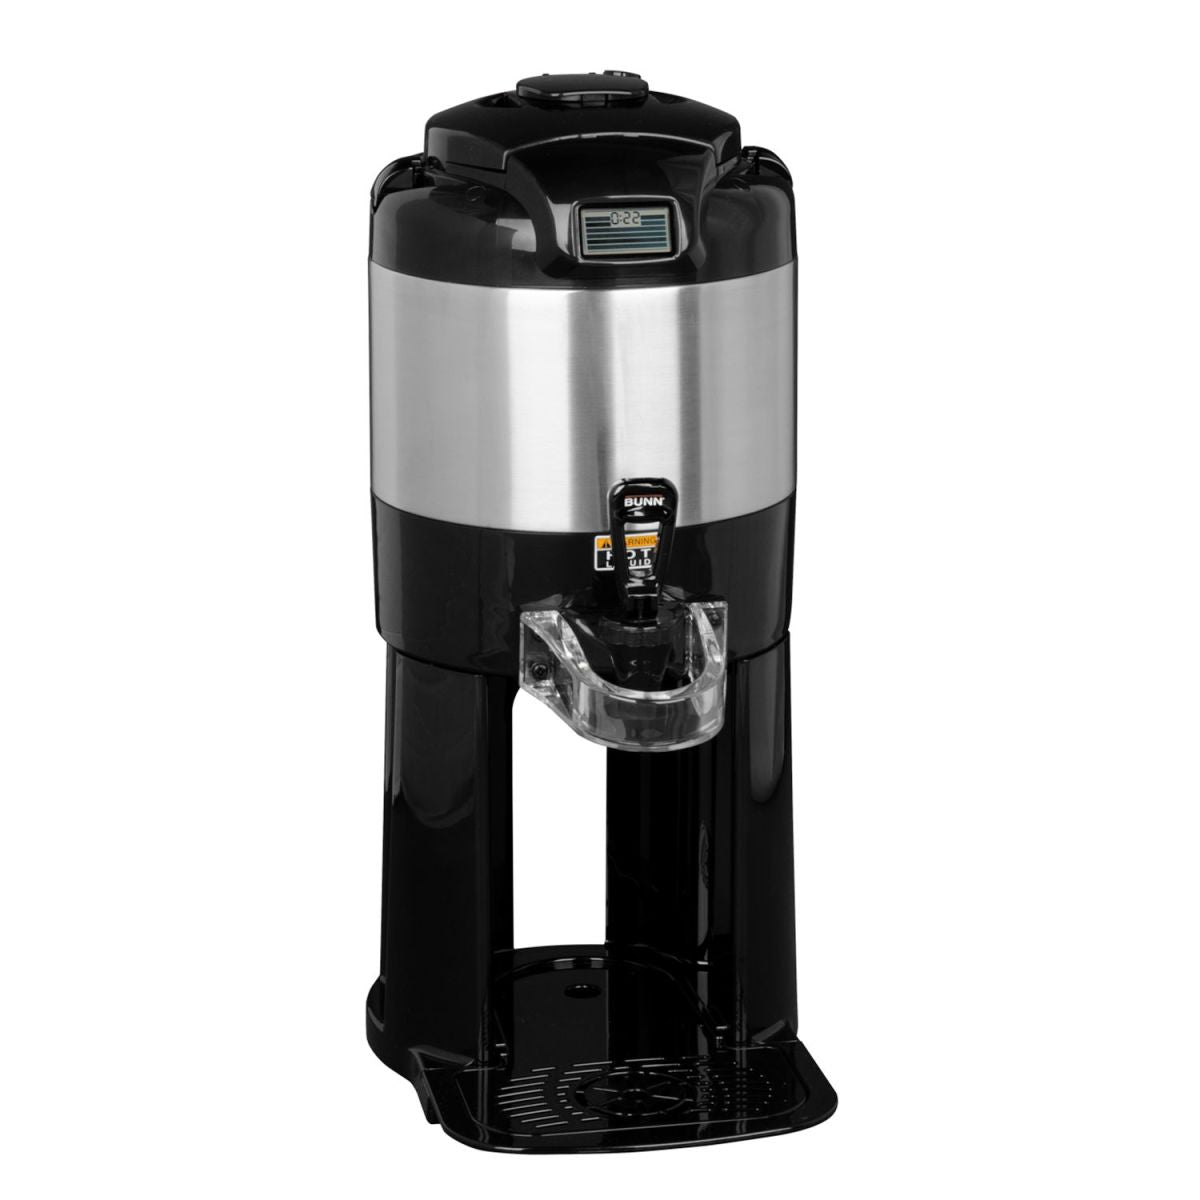 Bunn G9-2T BrewWISE DBC Portion Control Coffee Grinder - Stainless